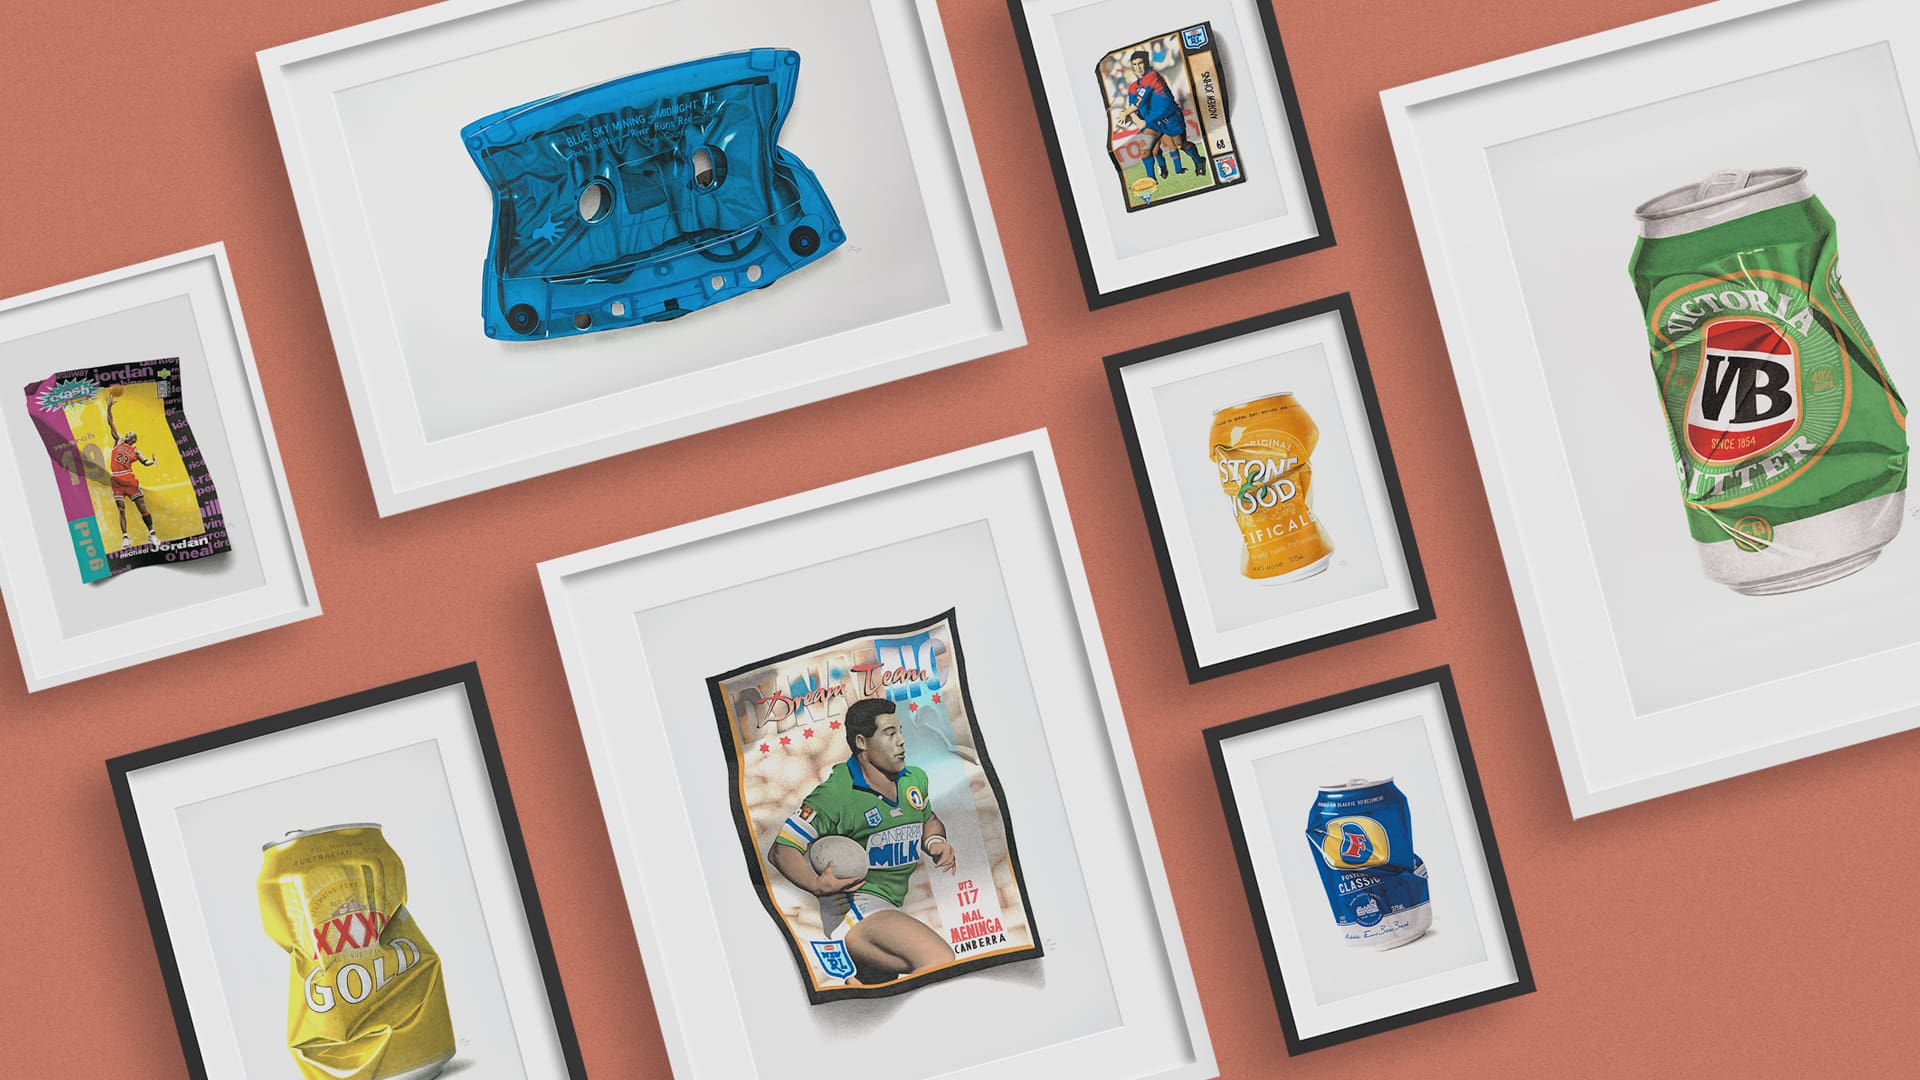 Father's Day Gift Guide - Artwork featuring Mal Meninga NRL card, VB can, XXXX can, Michael Jordan card, Midnight Oil artwork